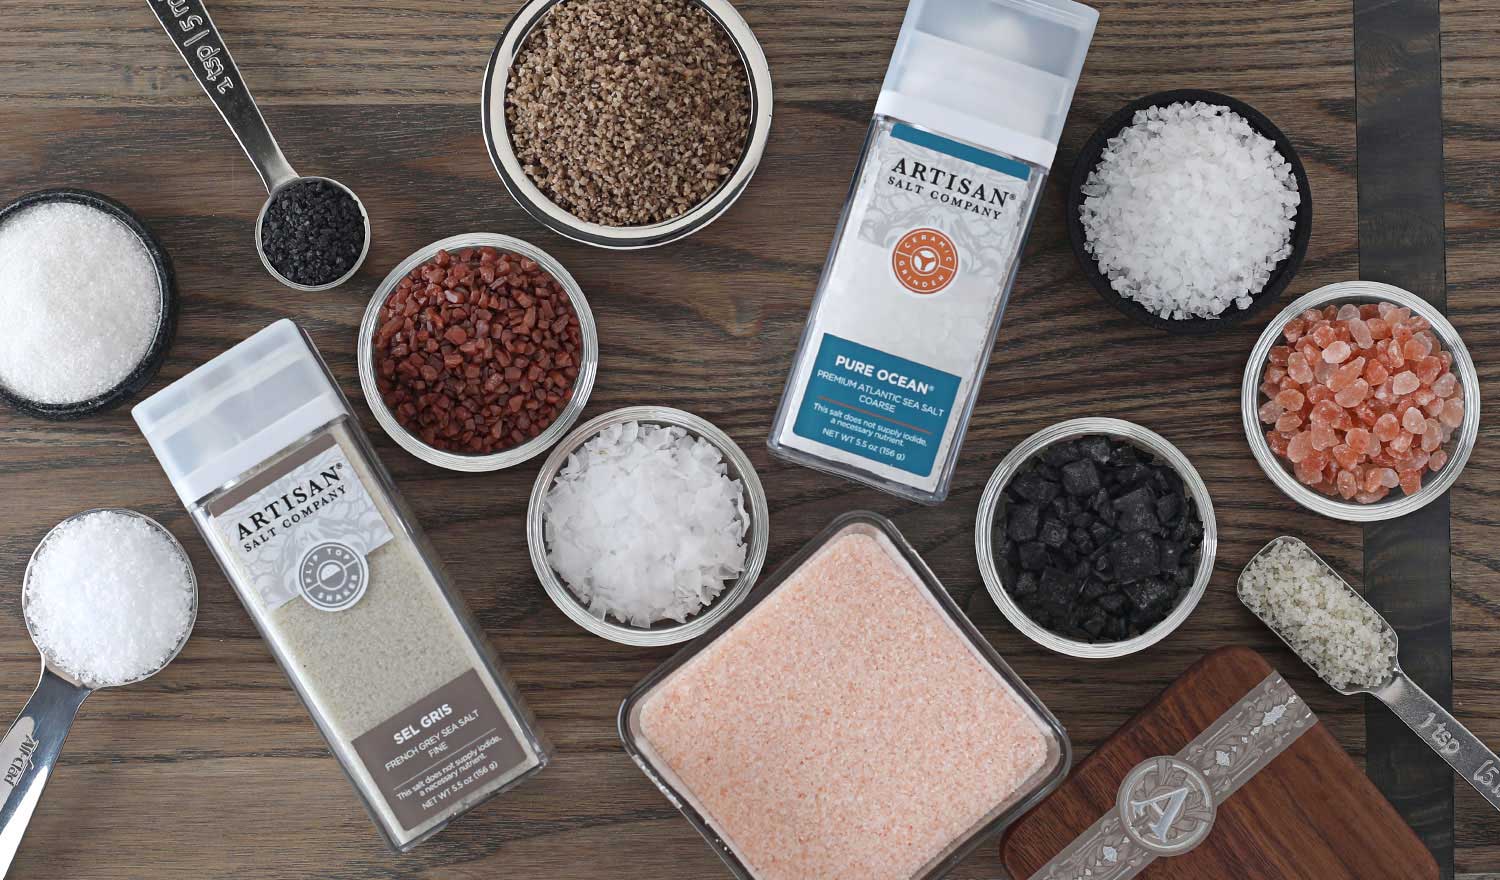 An assortment of Artisan Salt Company products in packaging and bowls